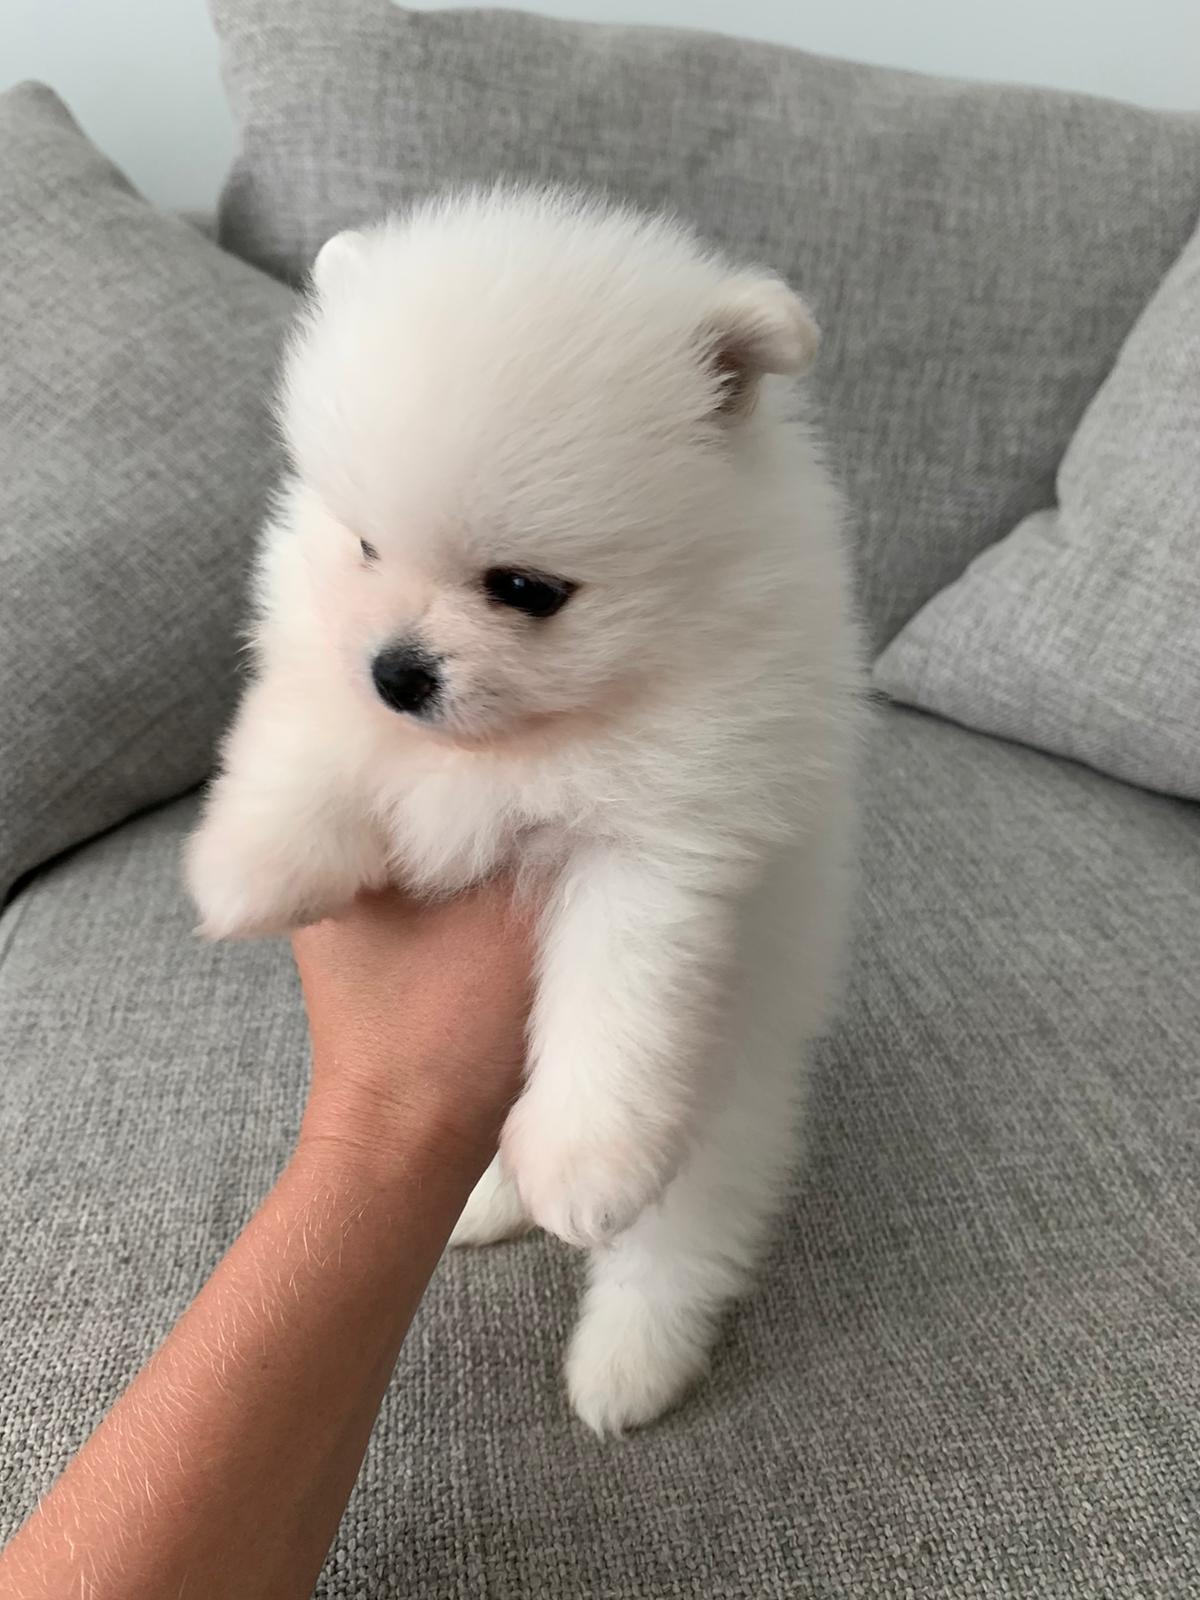 Teacup Pomeranian puppies in Miami for sale. 